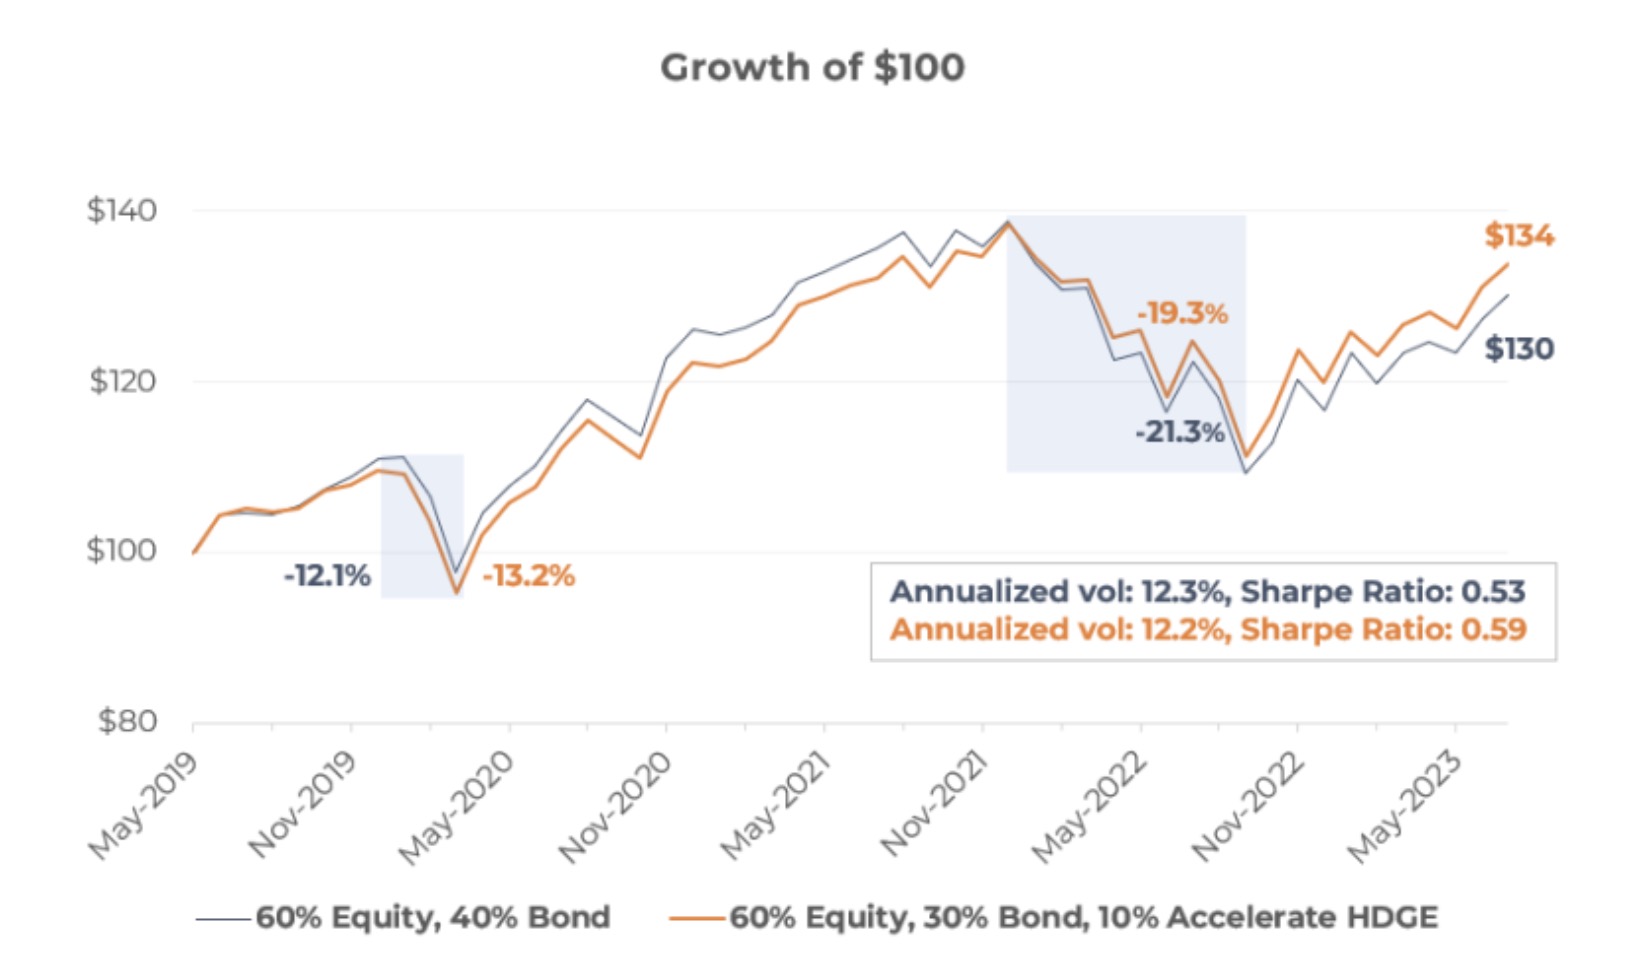 Accelerate HDGE fund Growth of $100 when added as 10% to a 60/40 to create a 60/30/10 portfolio vs a 60/40 portfolio 